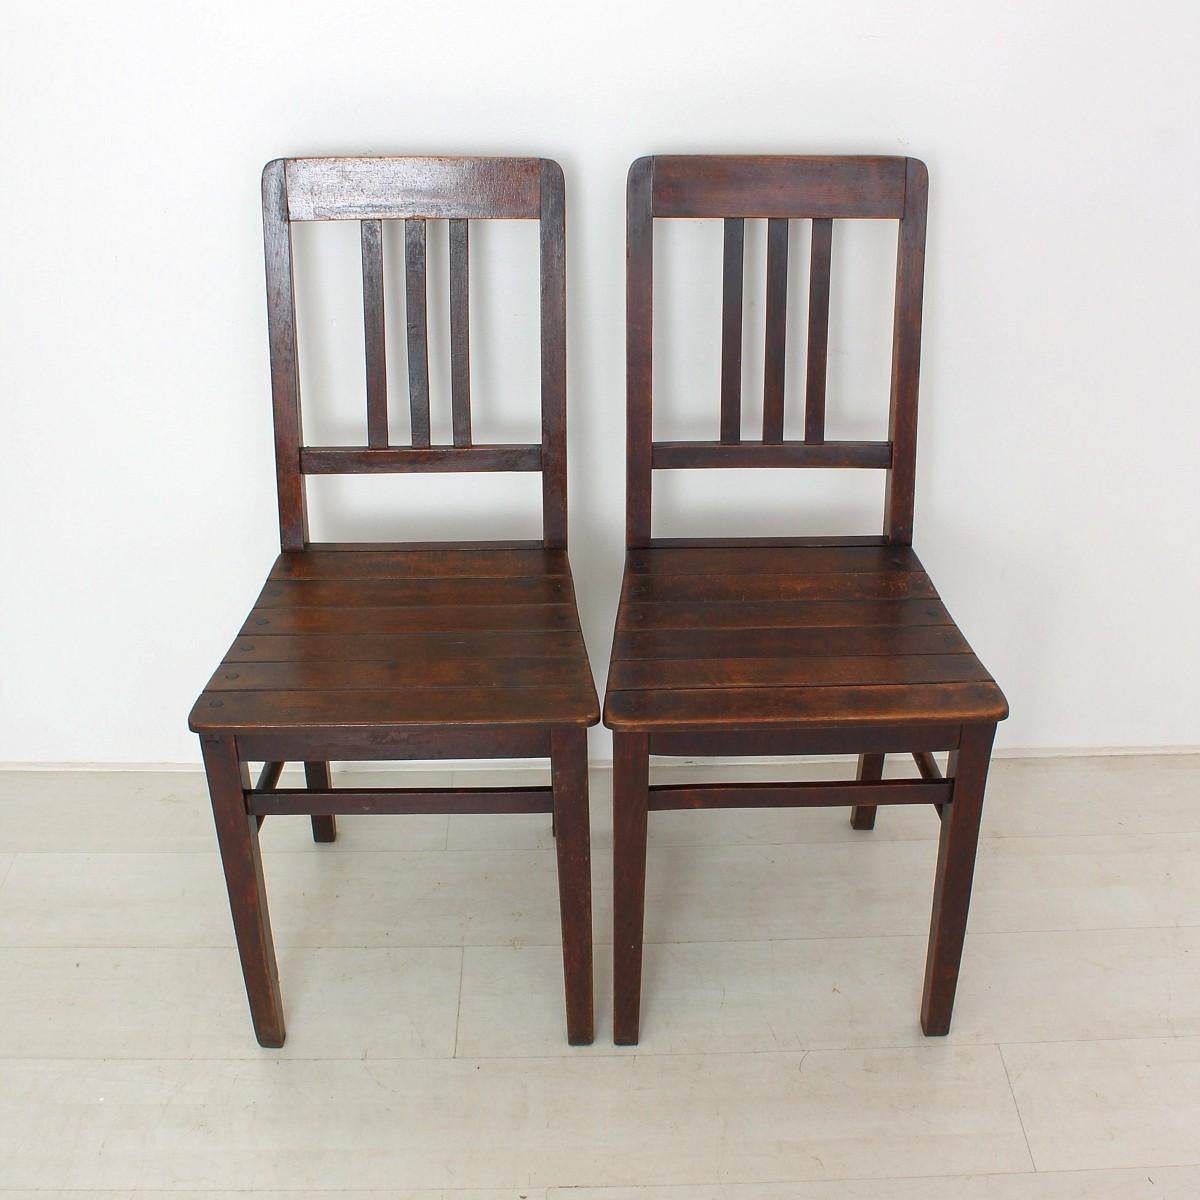 Beech Set of Two Vintage Wooden Chairs, circa 1920 For Sale